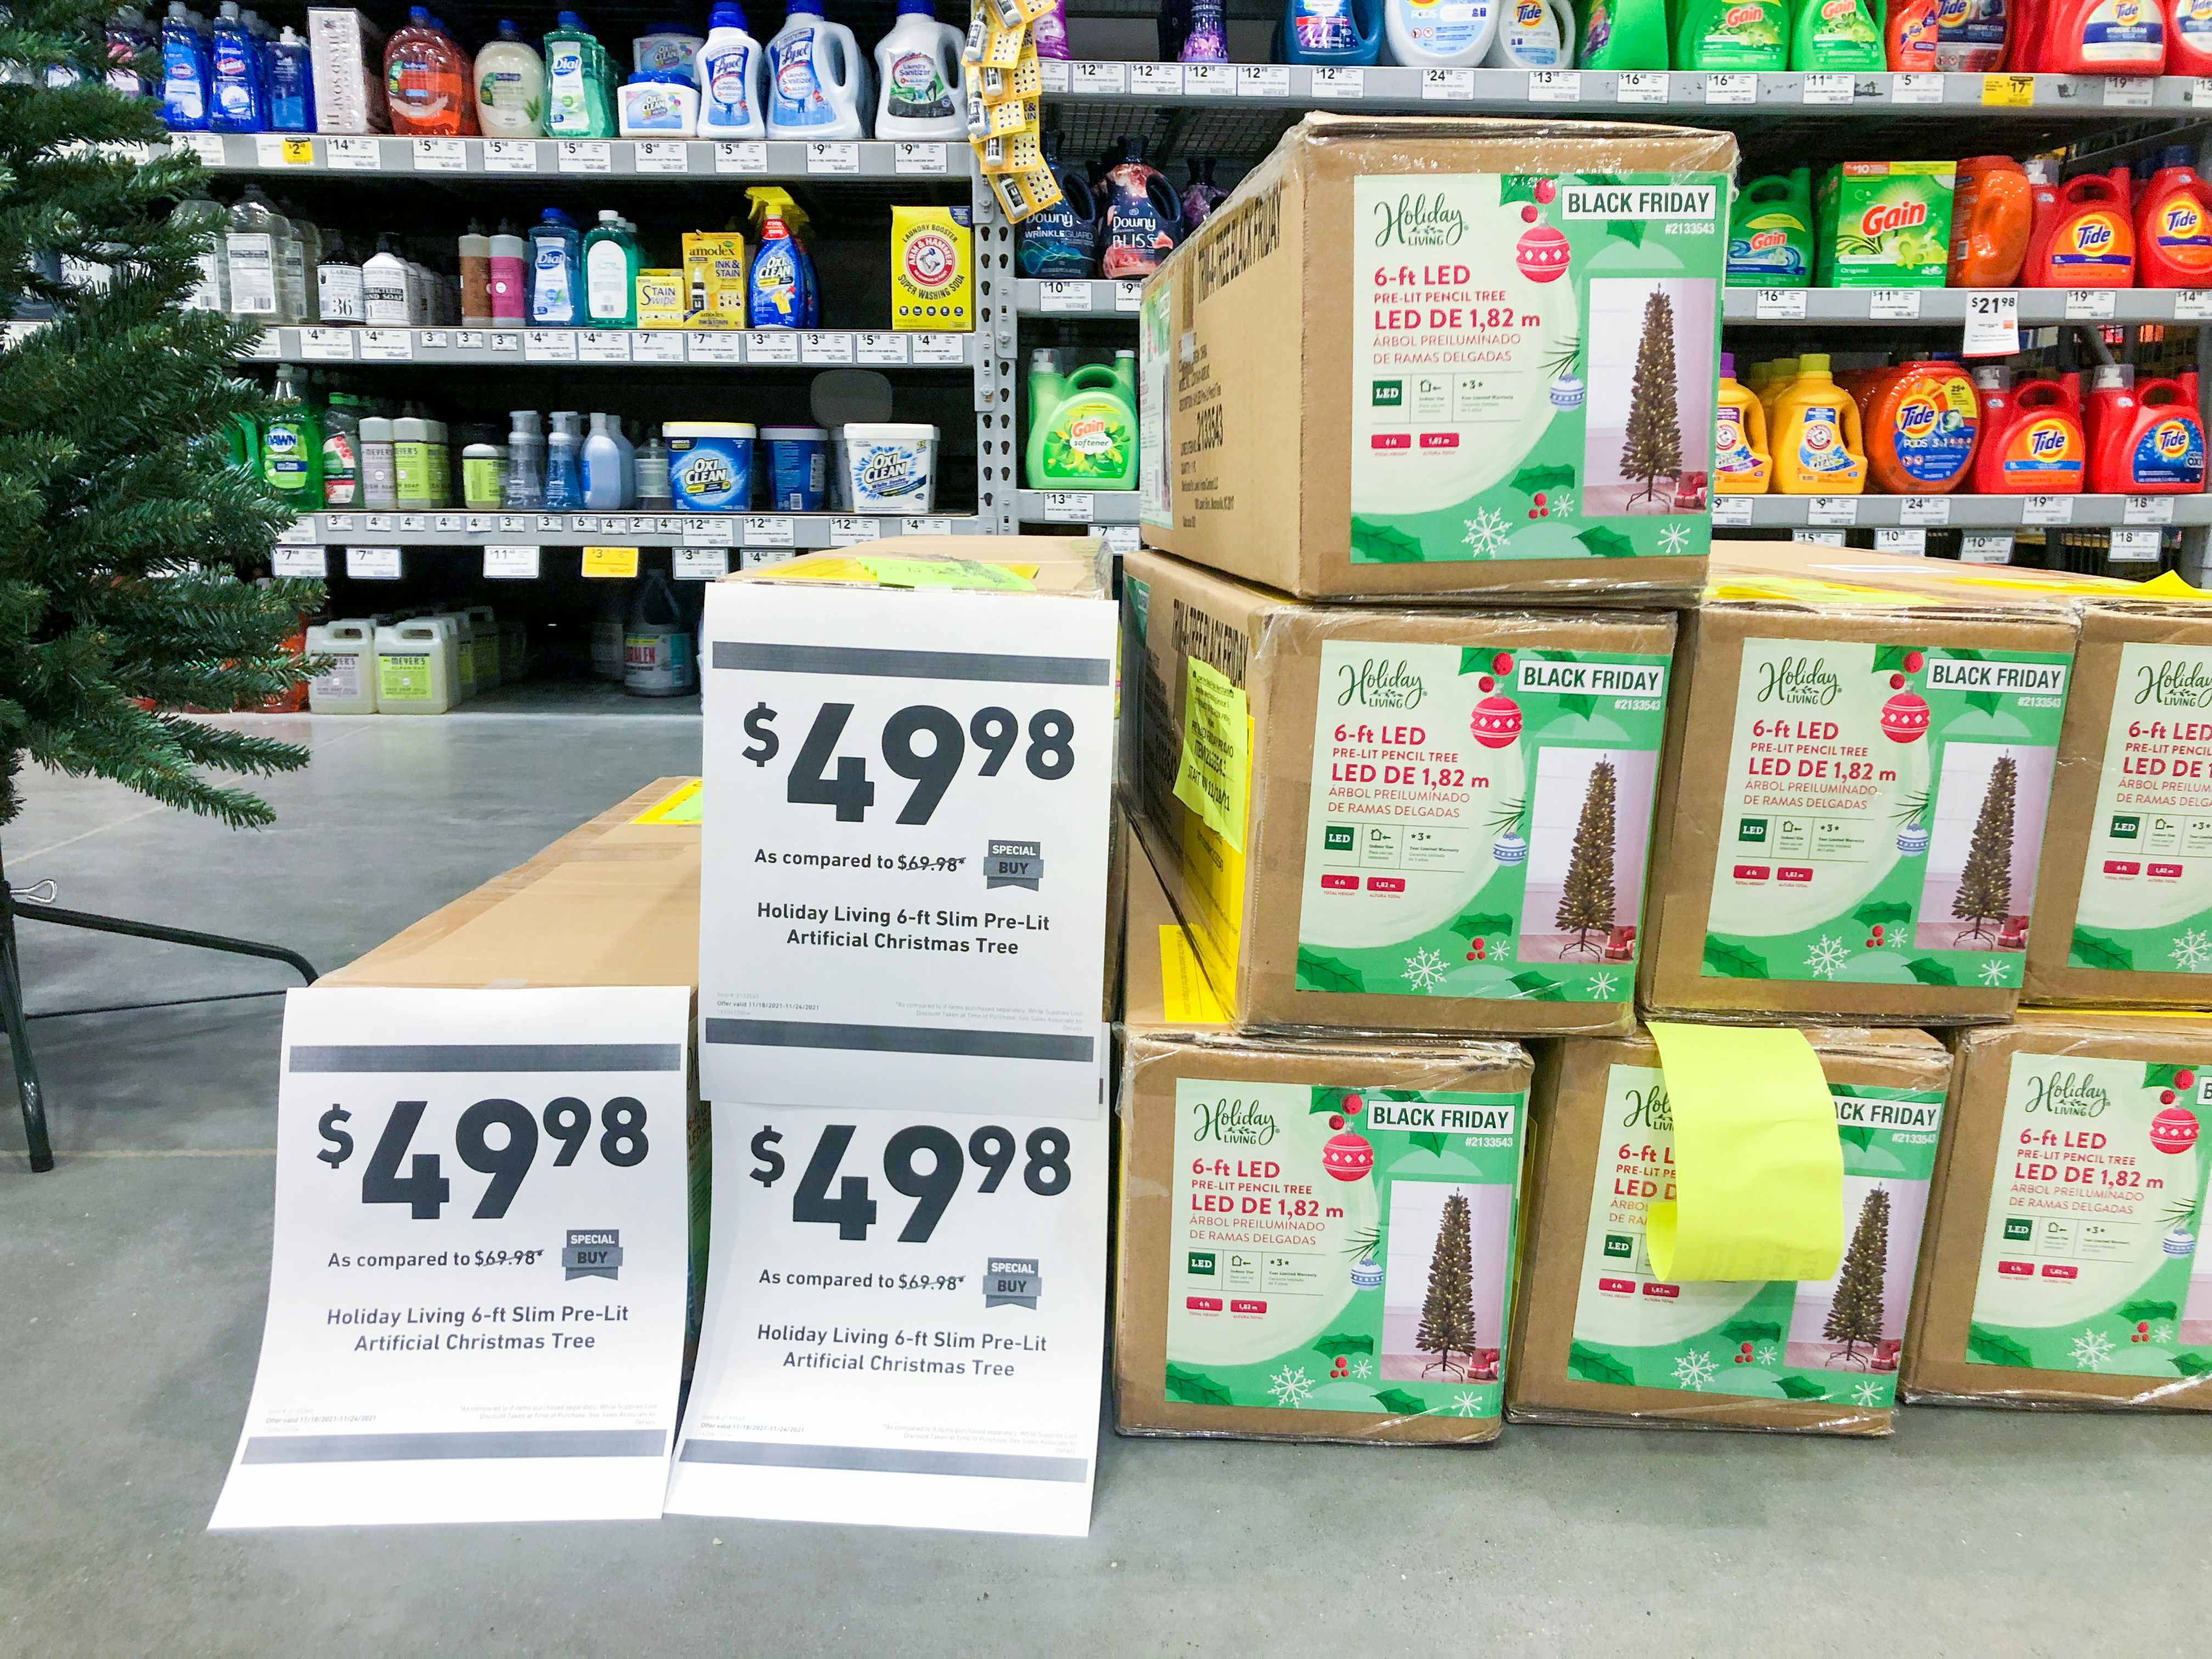 Boxed Christmas trees on display at Lowe's with signs advertising their price to be $49.98